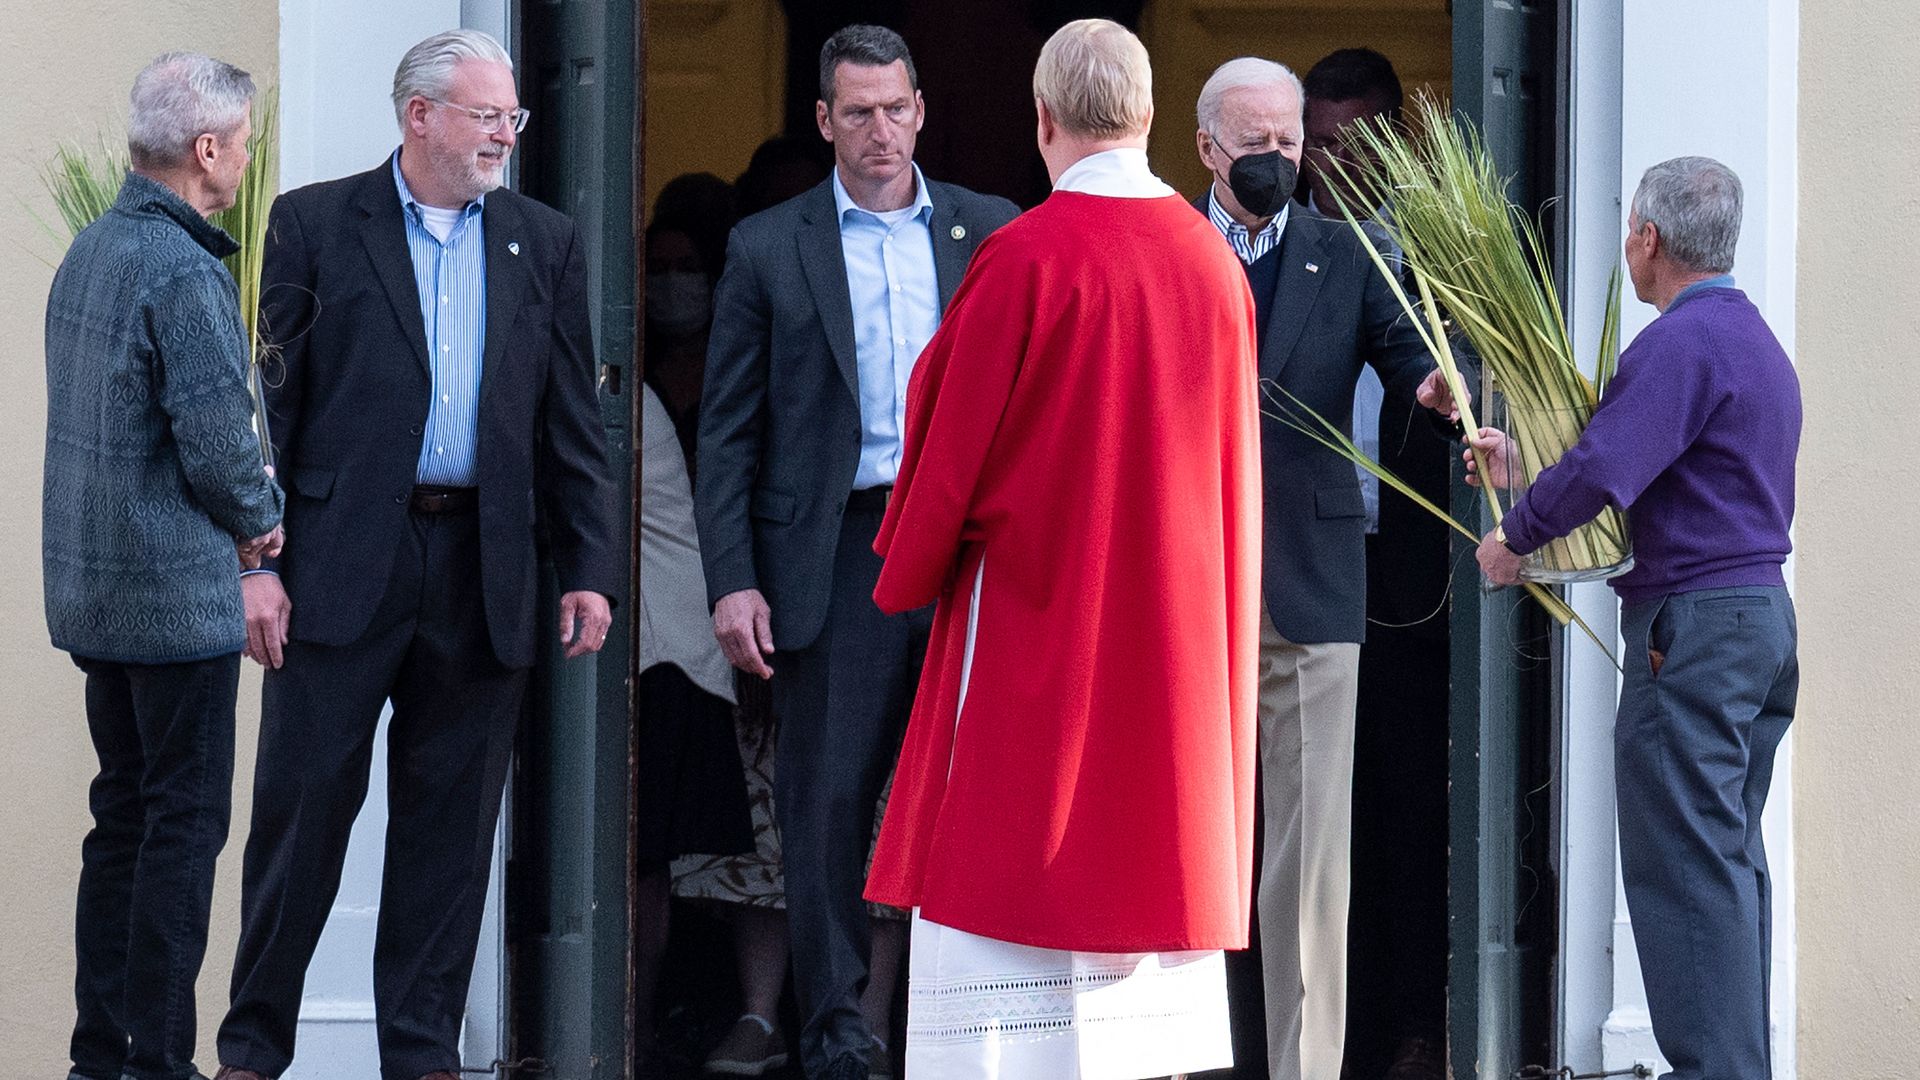 President Biden is seen receiving a palm frond as he left Mass on the eve of Palm Sunday.